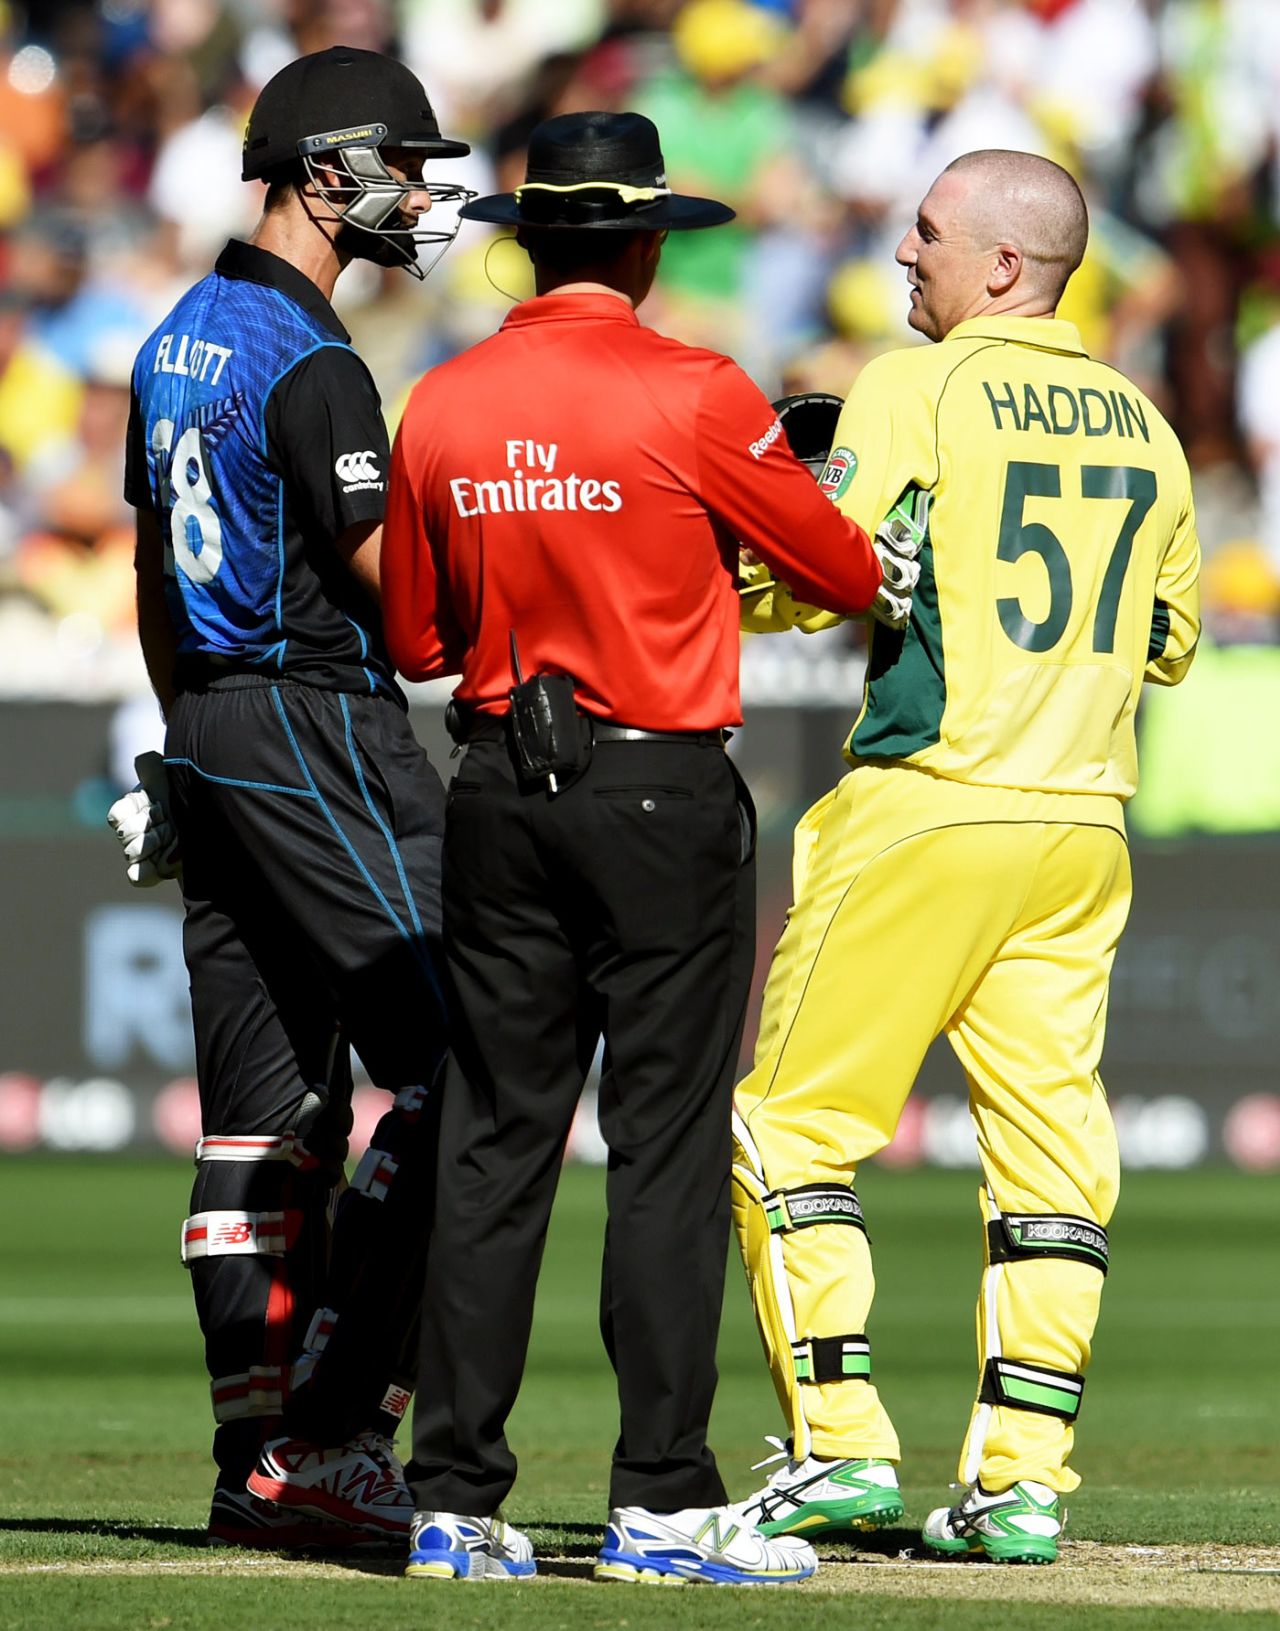 Brad Haddin exchanges words with Grant Elliott, Australia v New Zealand, World Cup 2015, final, Melbourne, March 29, 2015